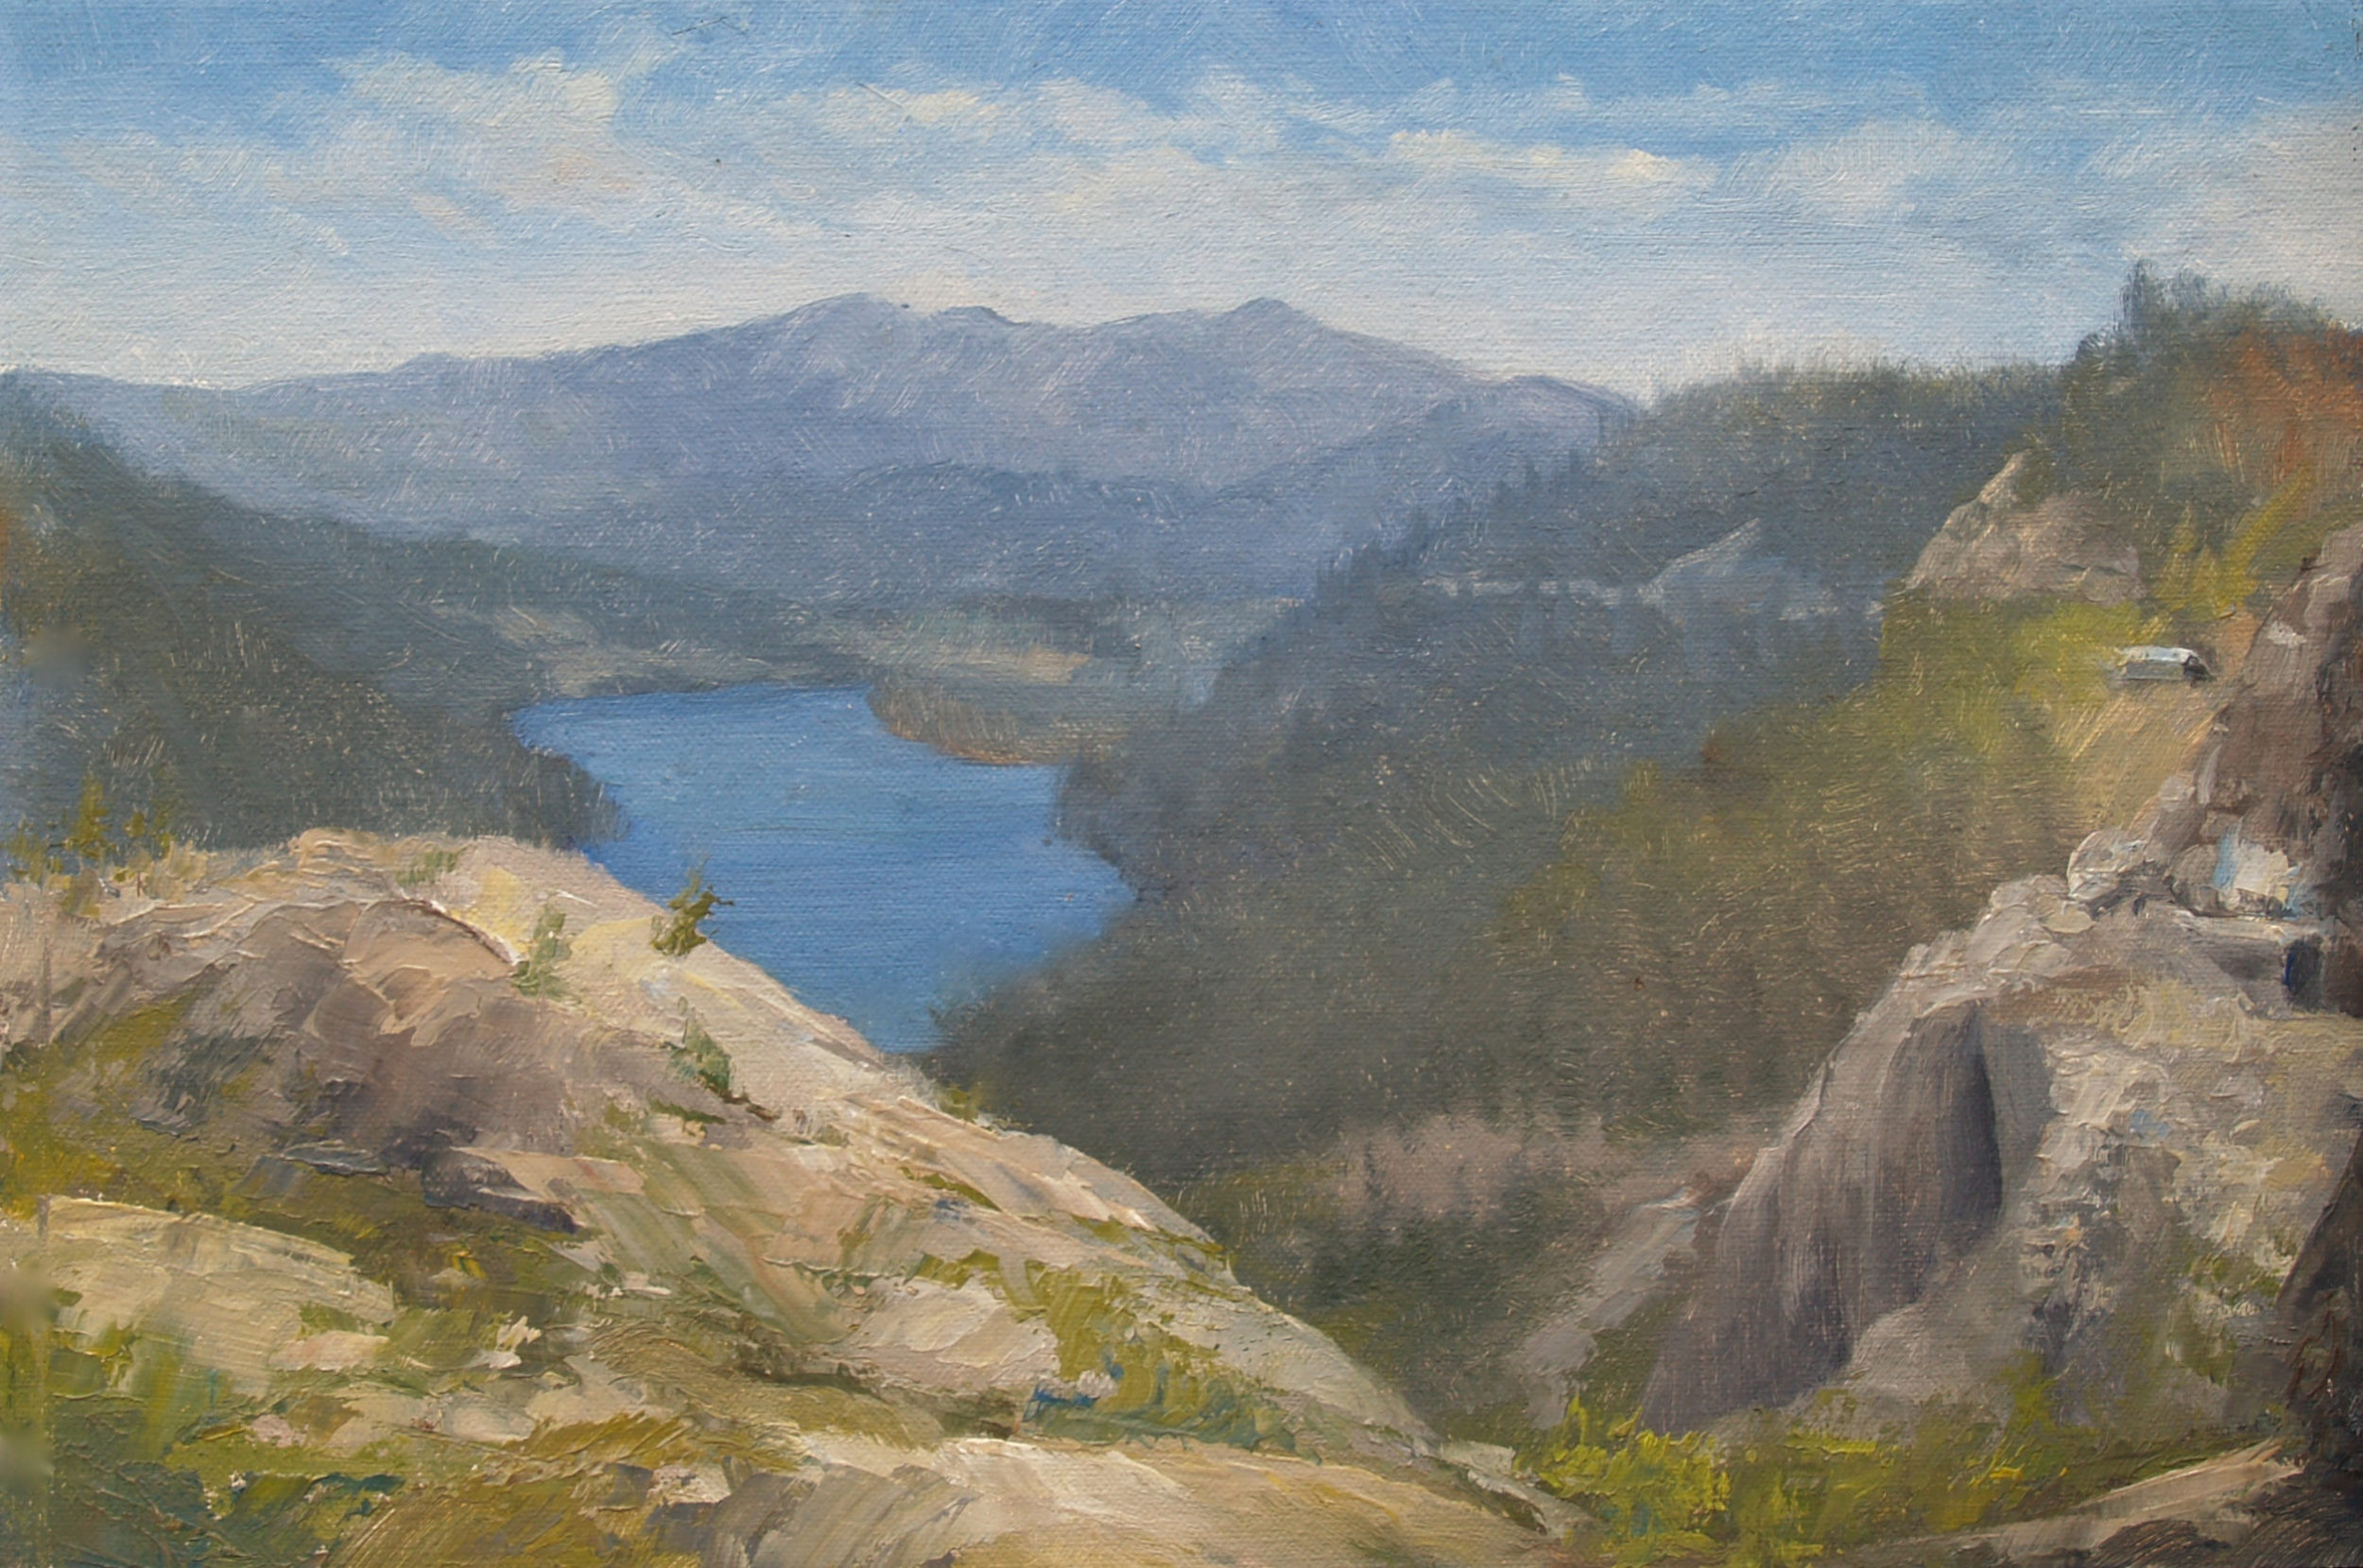 This painting of Donner Lake was painted as a study by Stefan Baumann, who captured a view of the landscape and the lake en plein air.